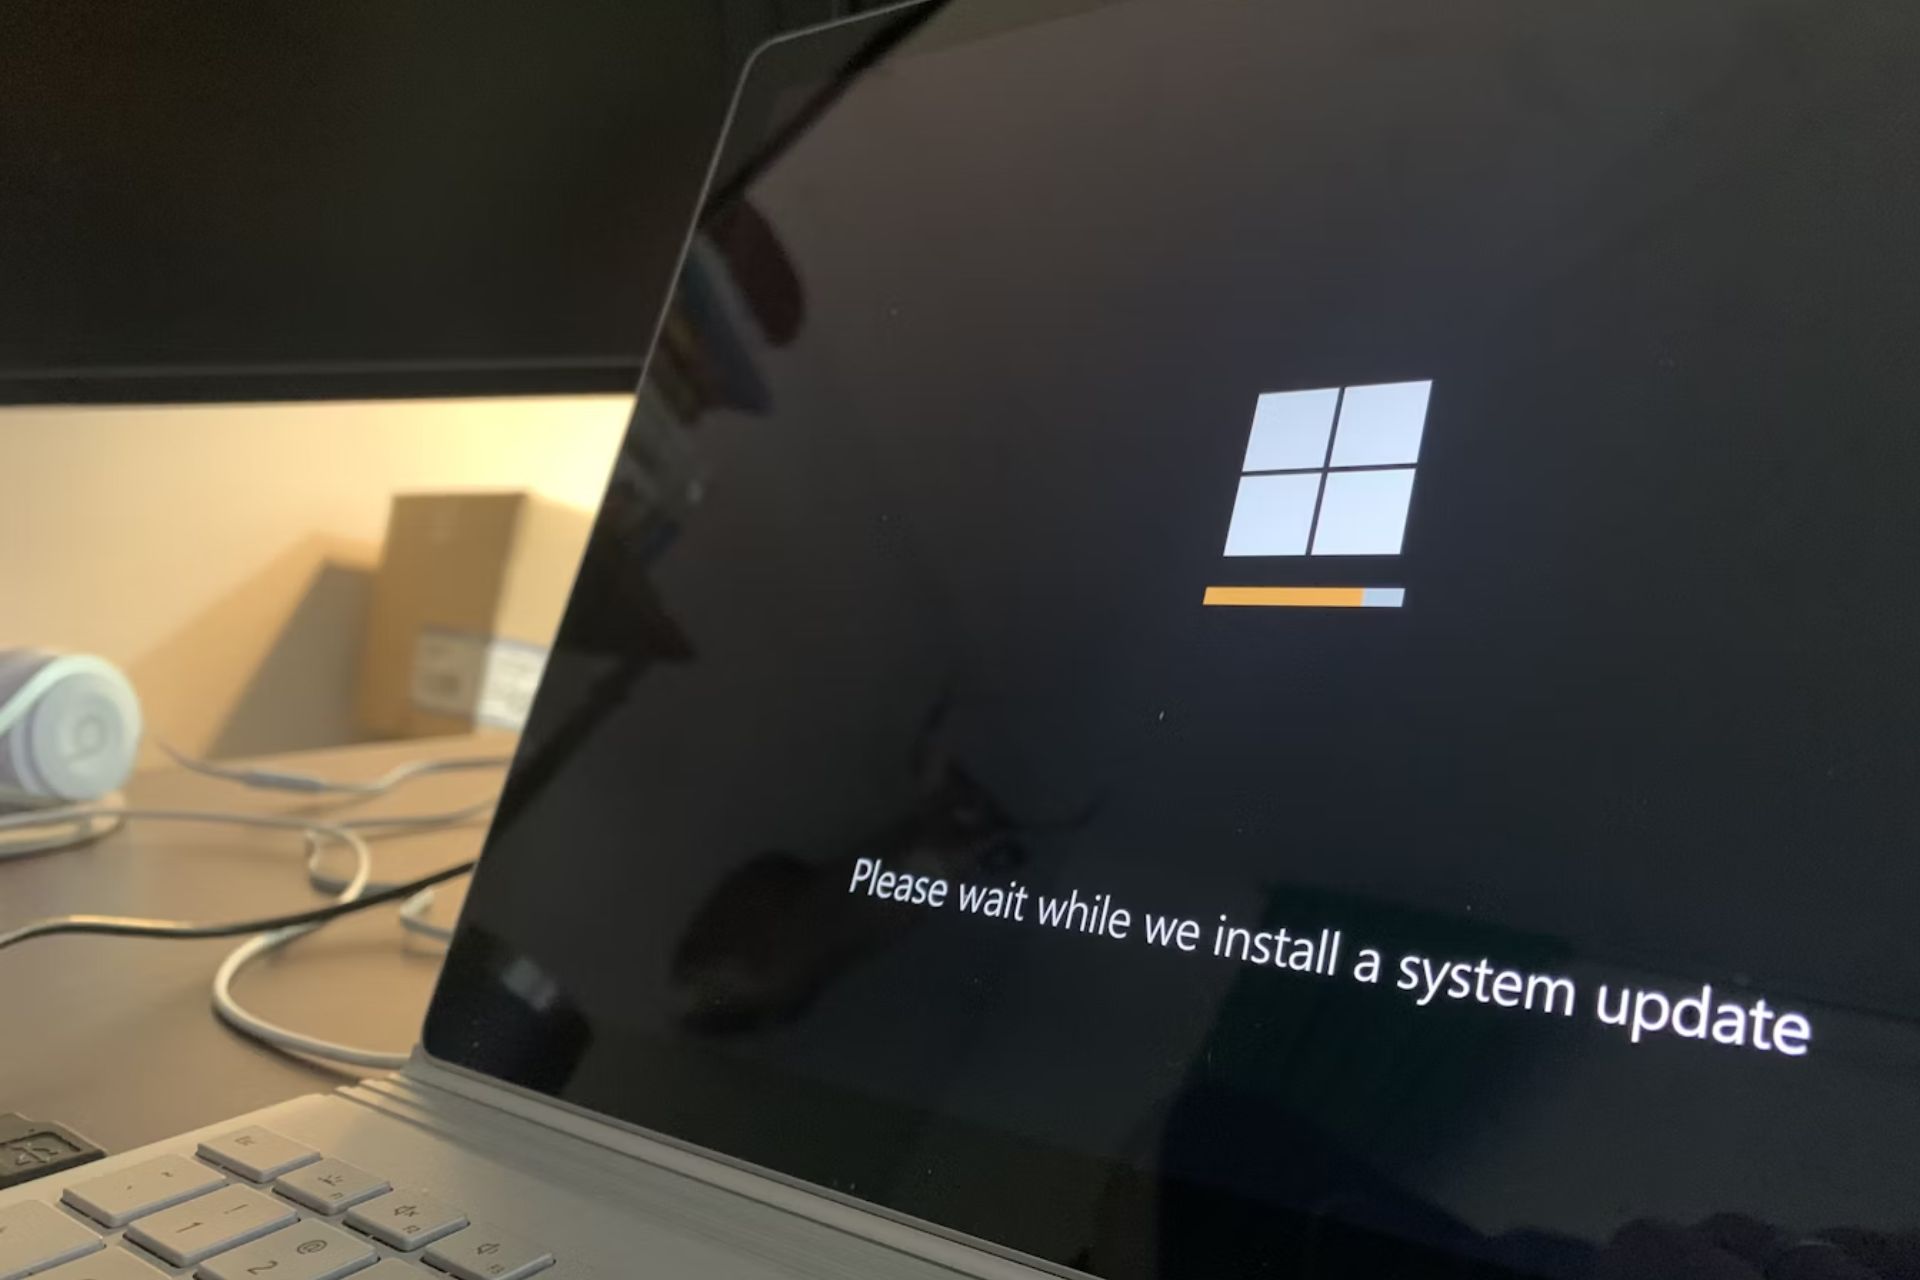 Microsoft brings some widget improvements in Windows 11 with the latest build release